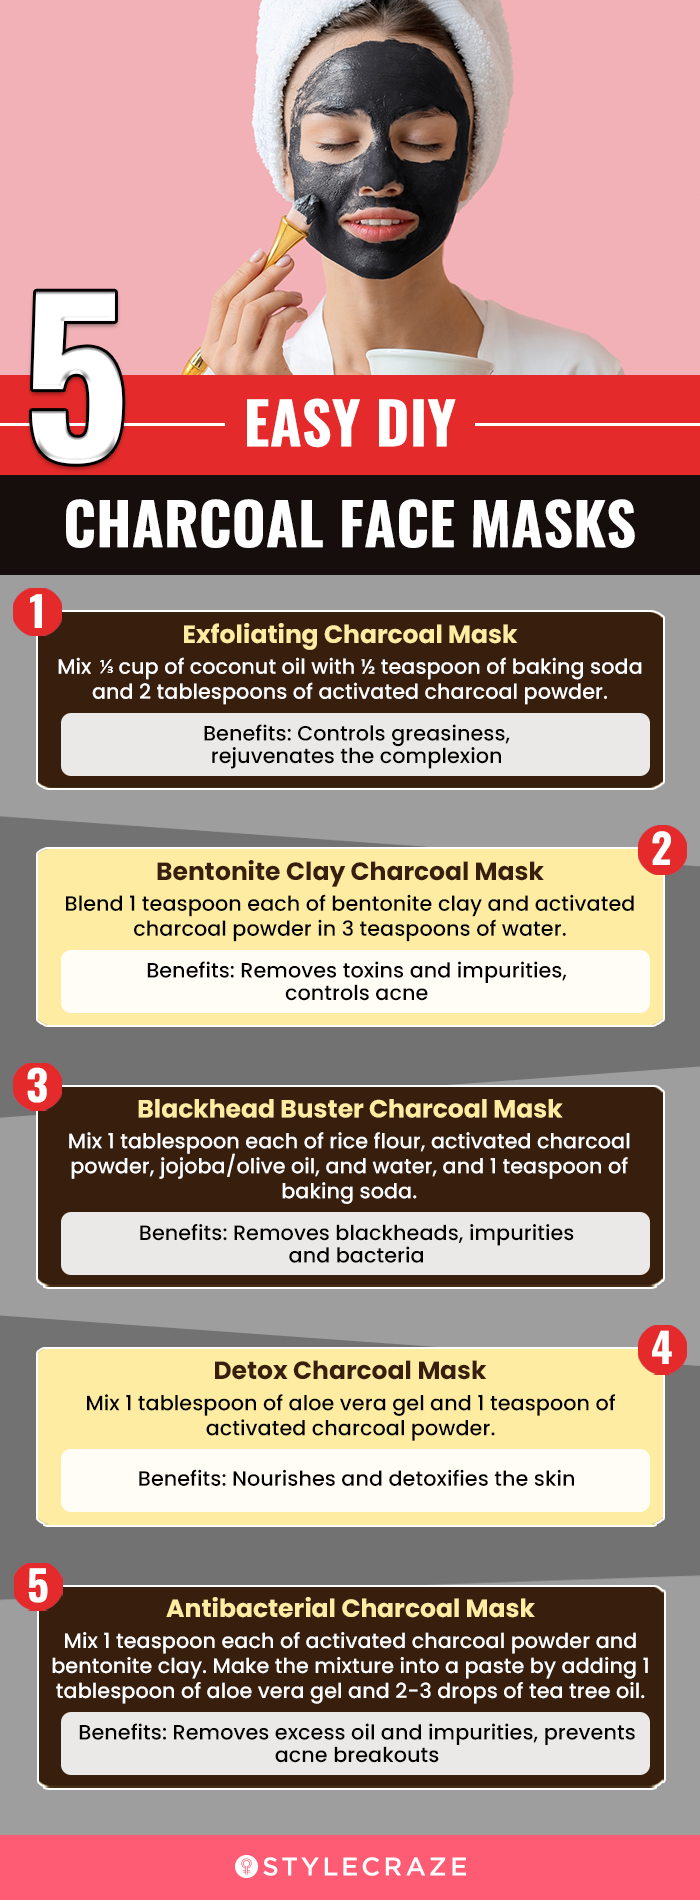 5 easy diy charcoal face masks (infographic)